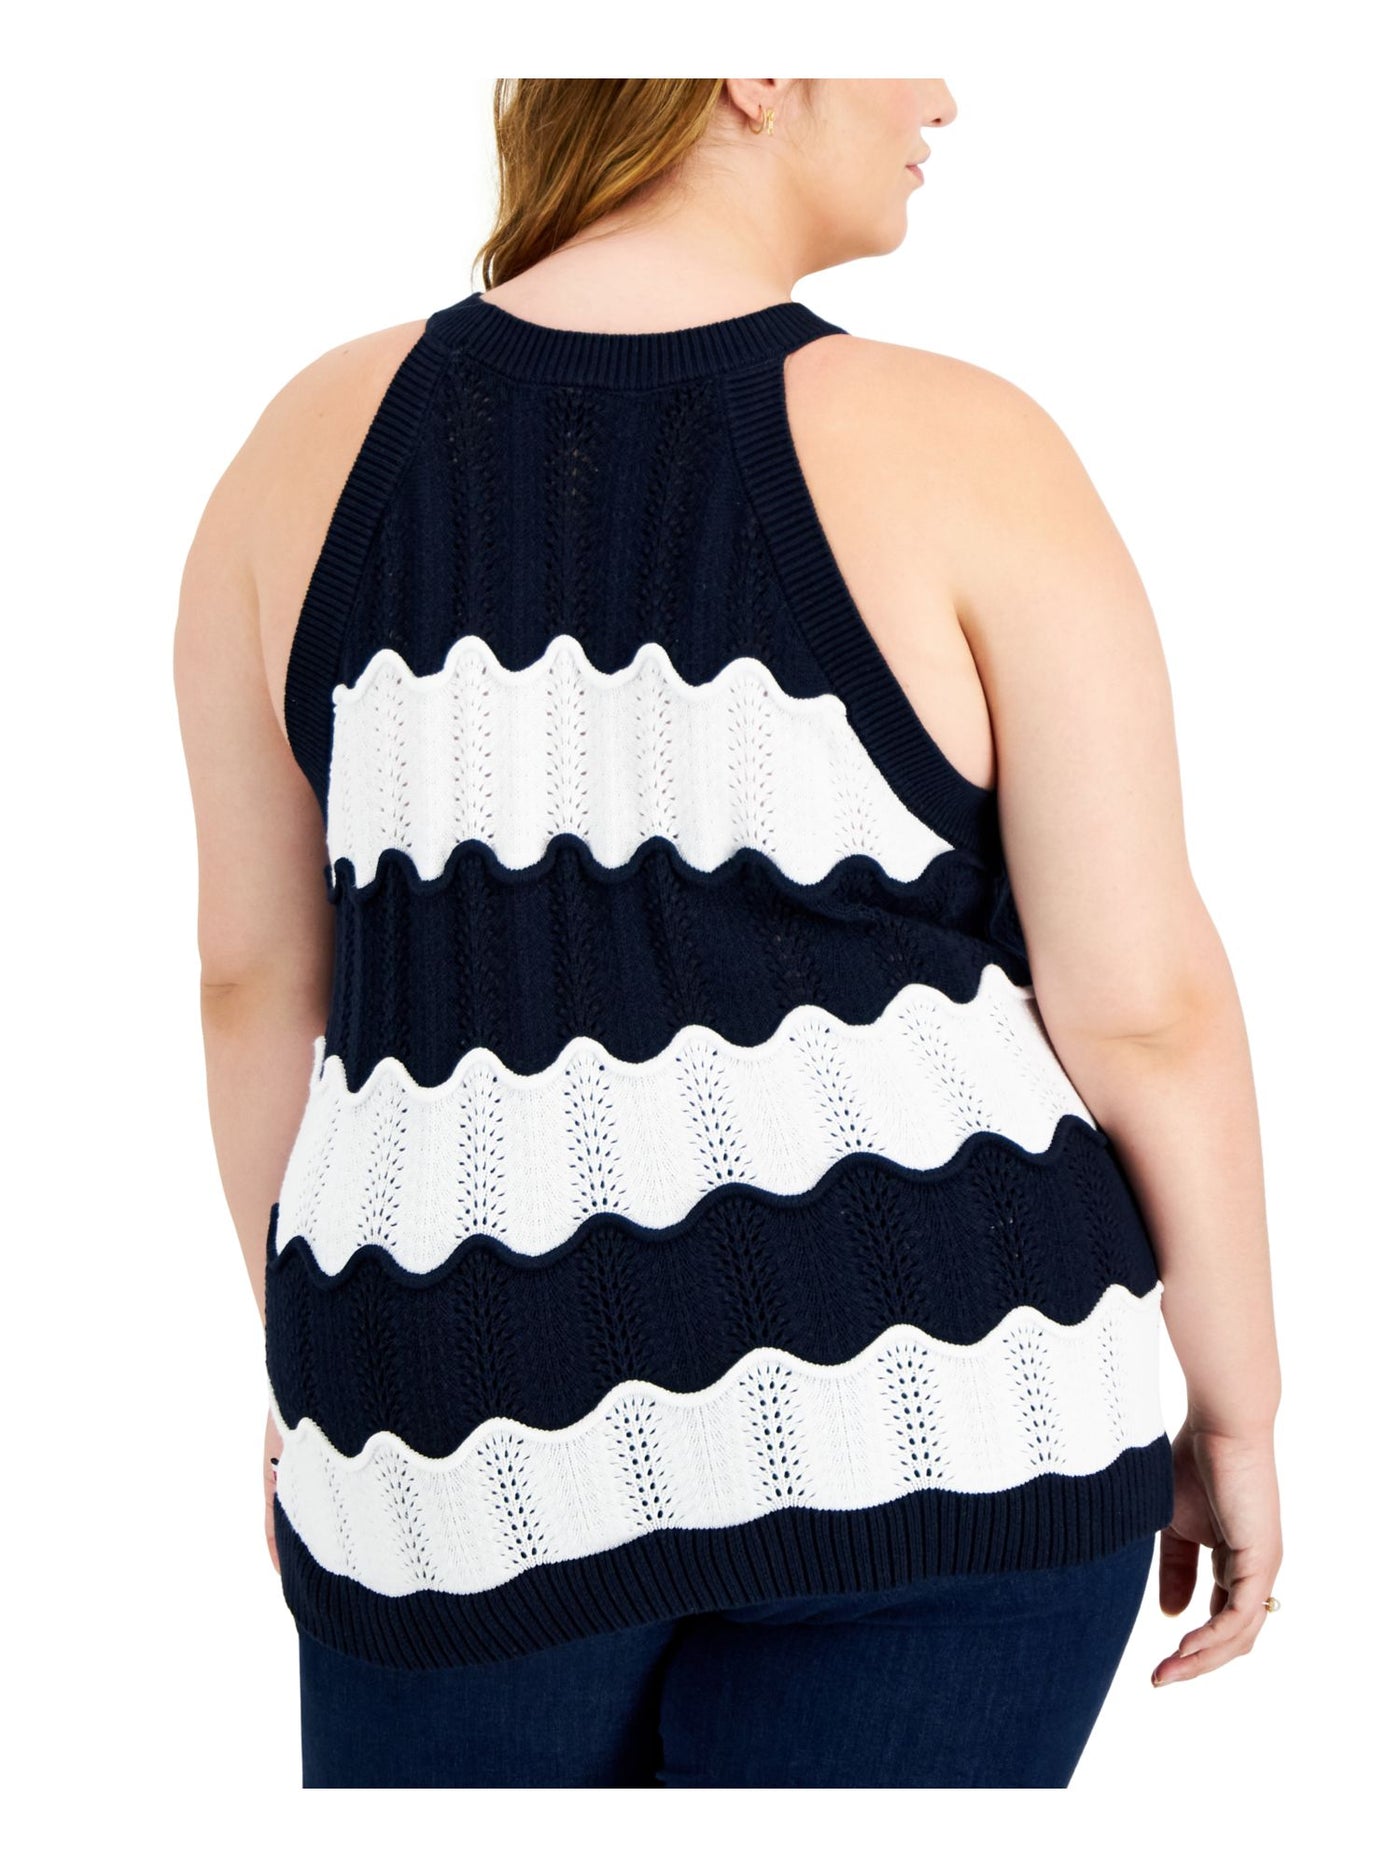 TOMMY HILFIGER Womens Navy Ribbed Scalloped Pullover Sheer Unlined Striped Sleeveless Crew Neck Tank Sweater Plus 0X